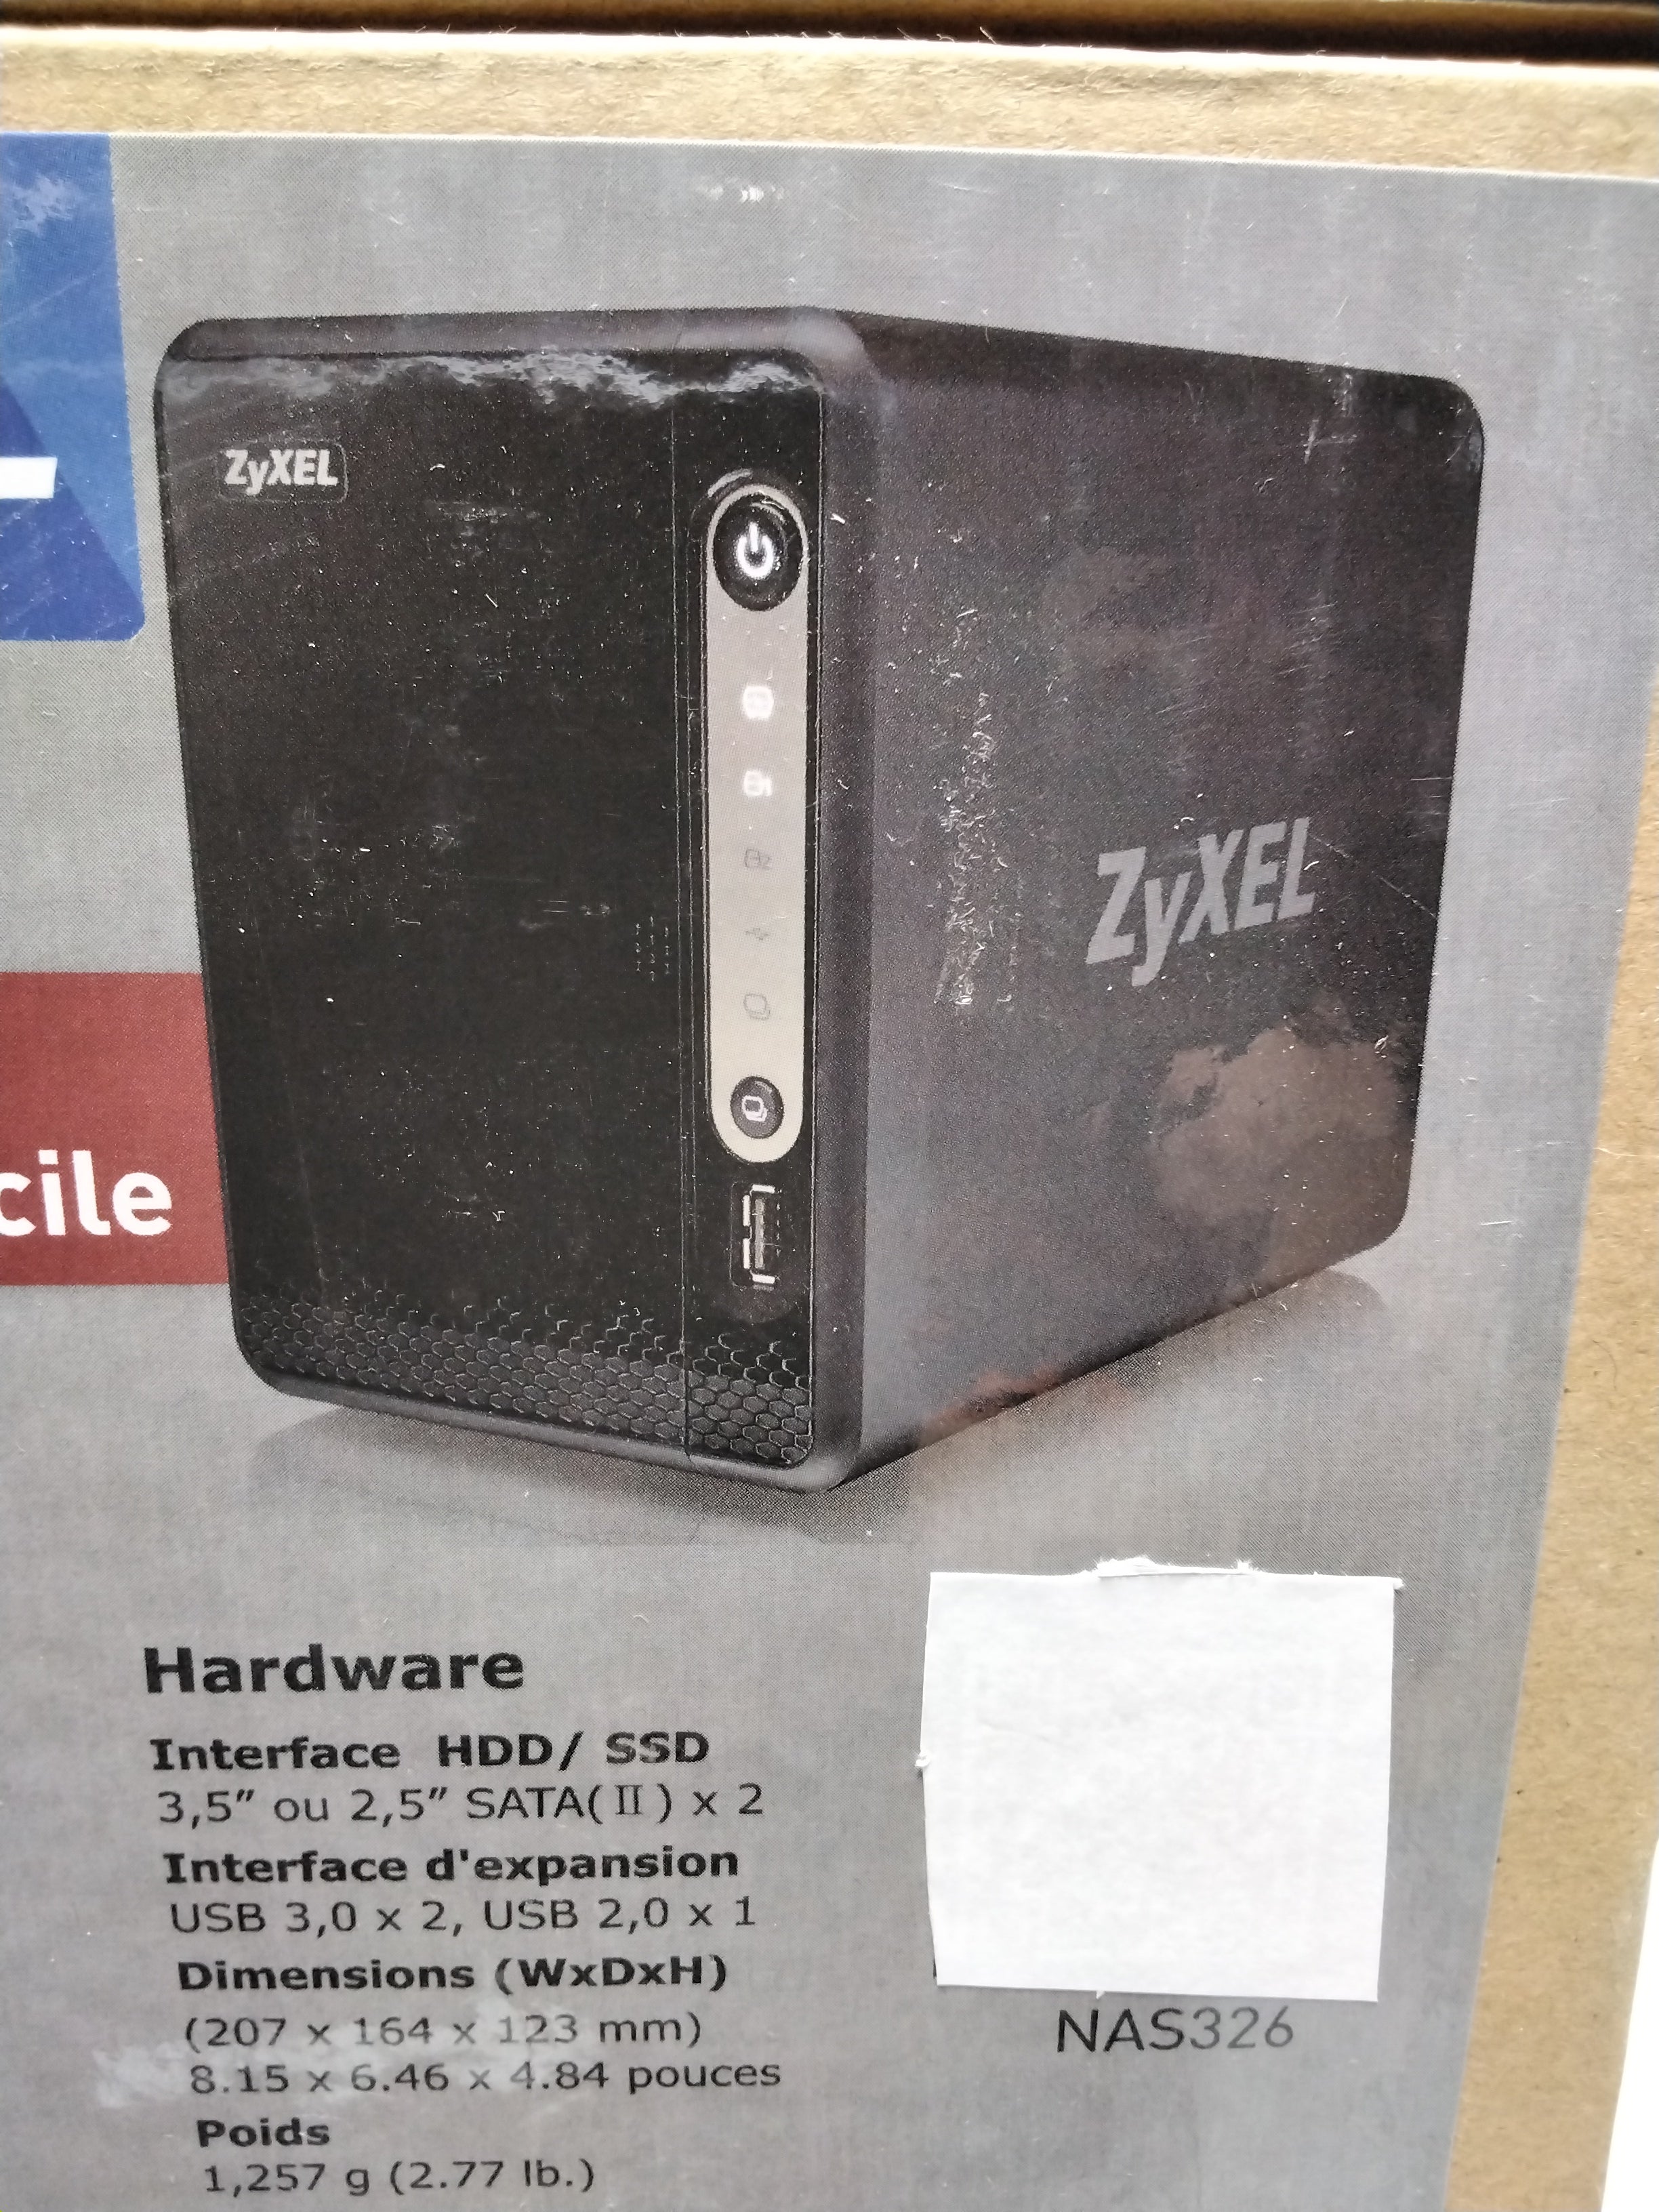 Zyxel Personal Cloud Storage [2-Bay] for Home, Disks not Included [NAS326] (7761829626094)